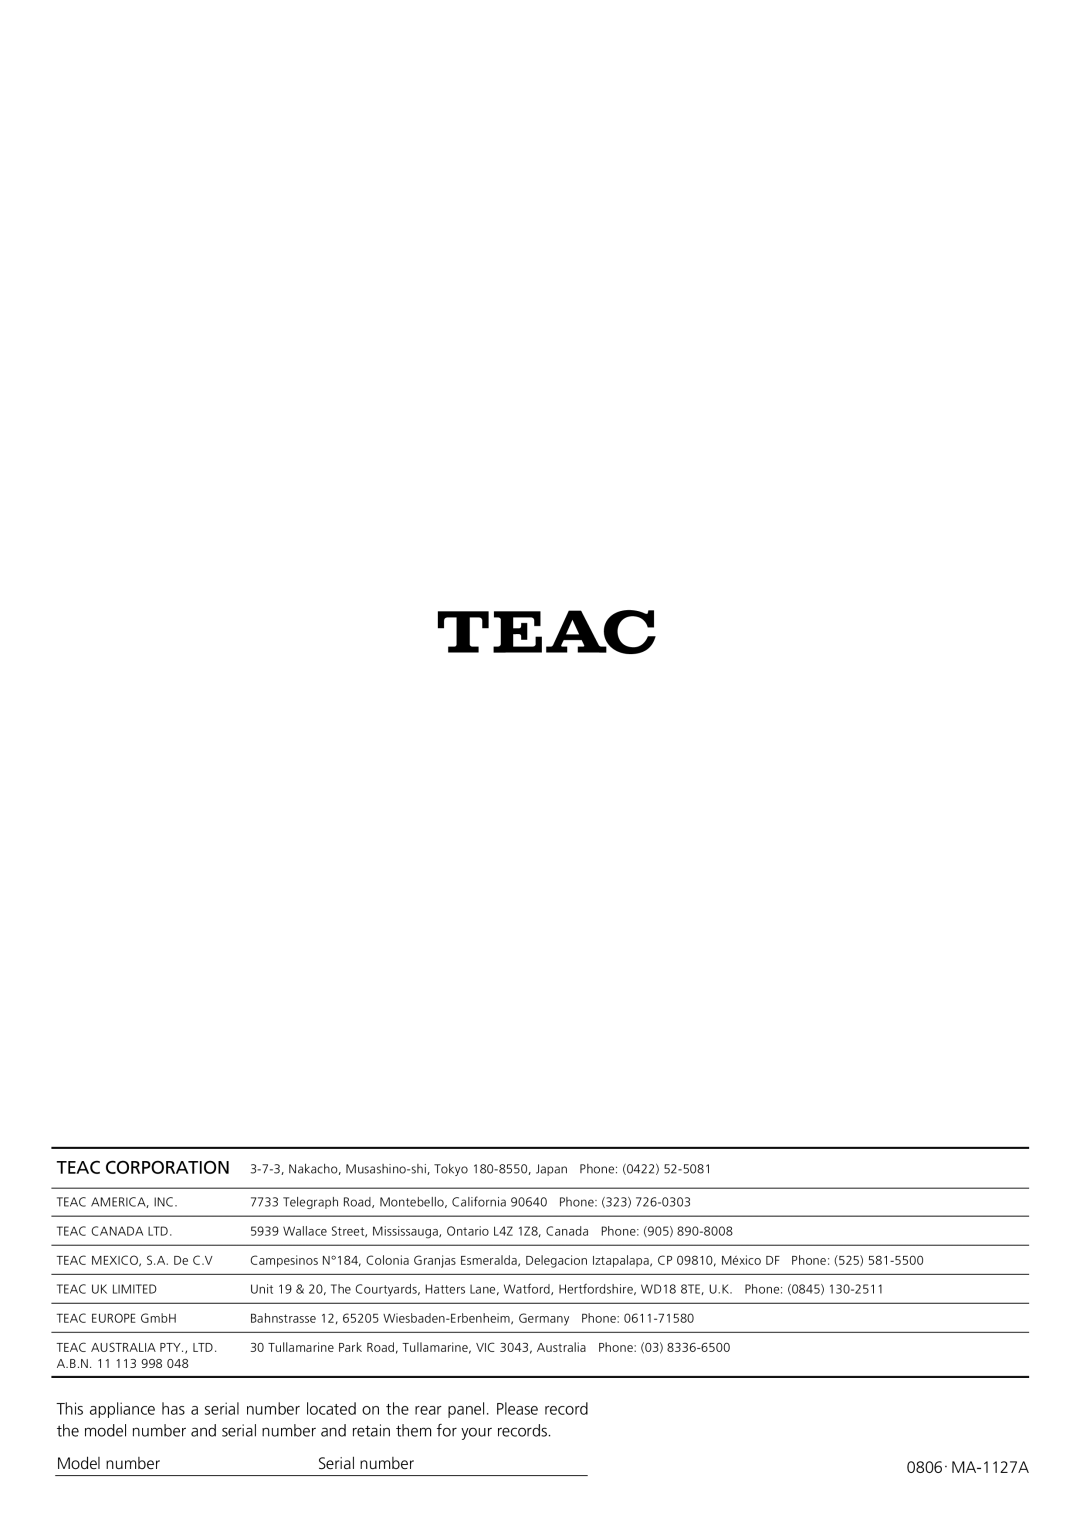 Teac AG-D8850 owner manual Teac Corporation, Model number, Serial number, MA-1127A 